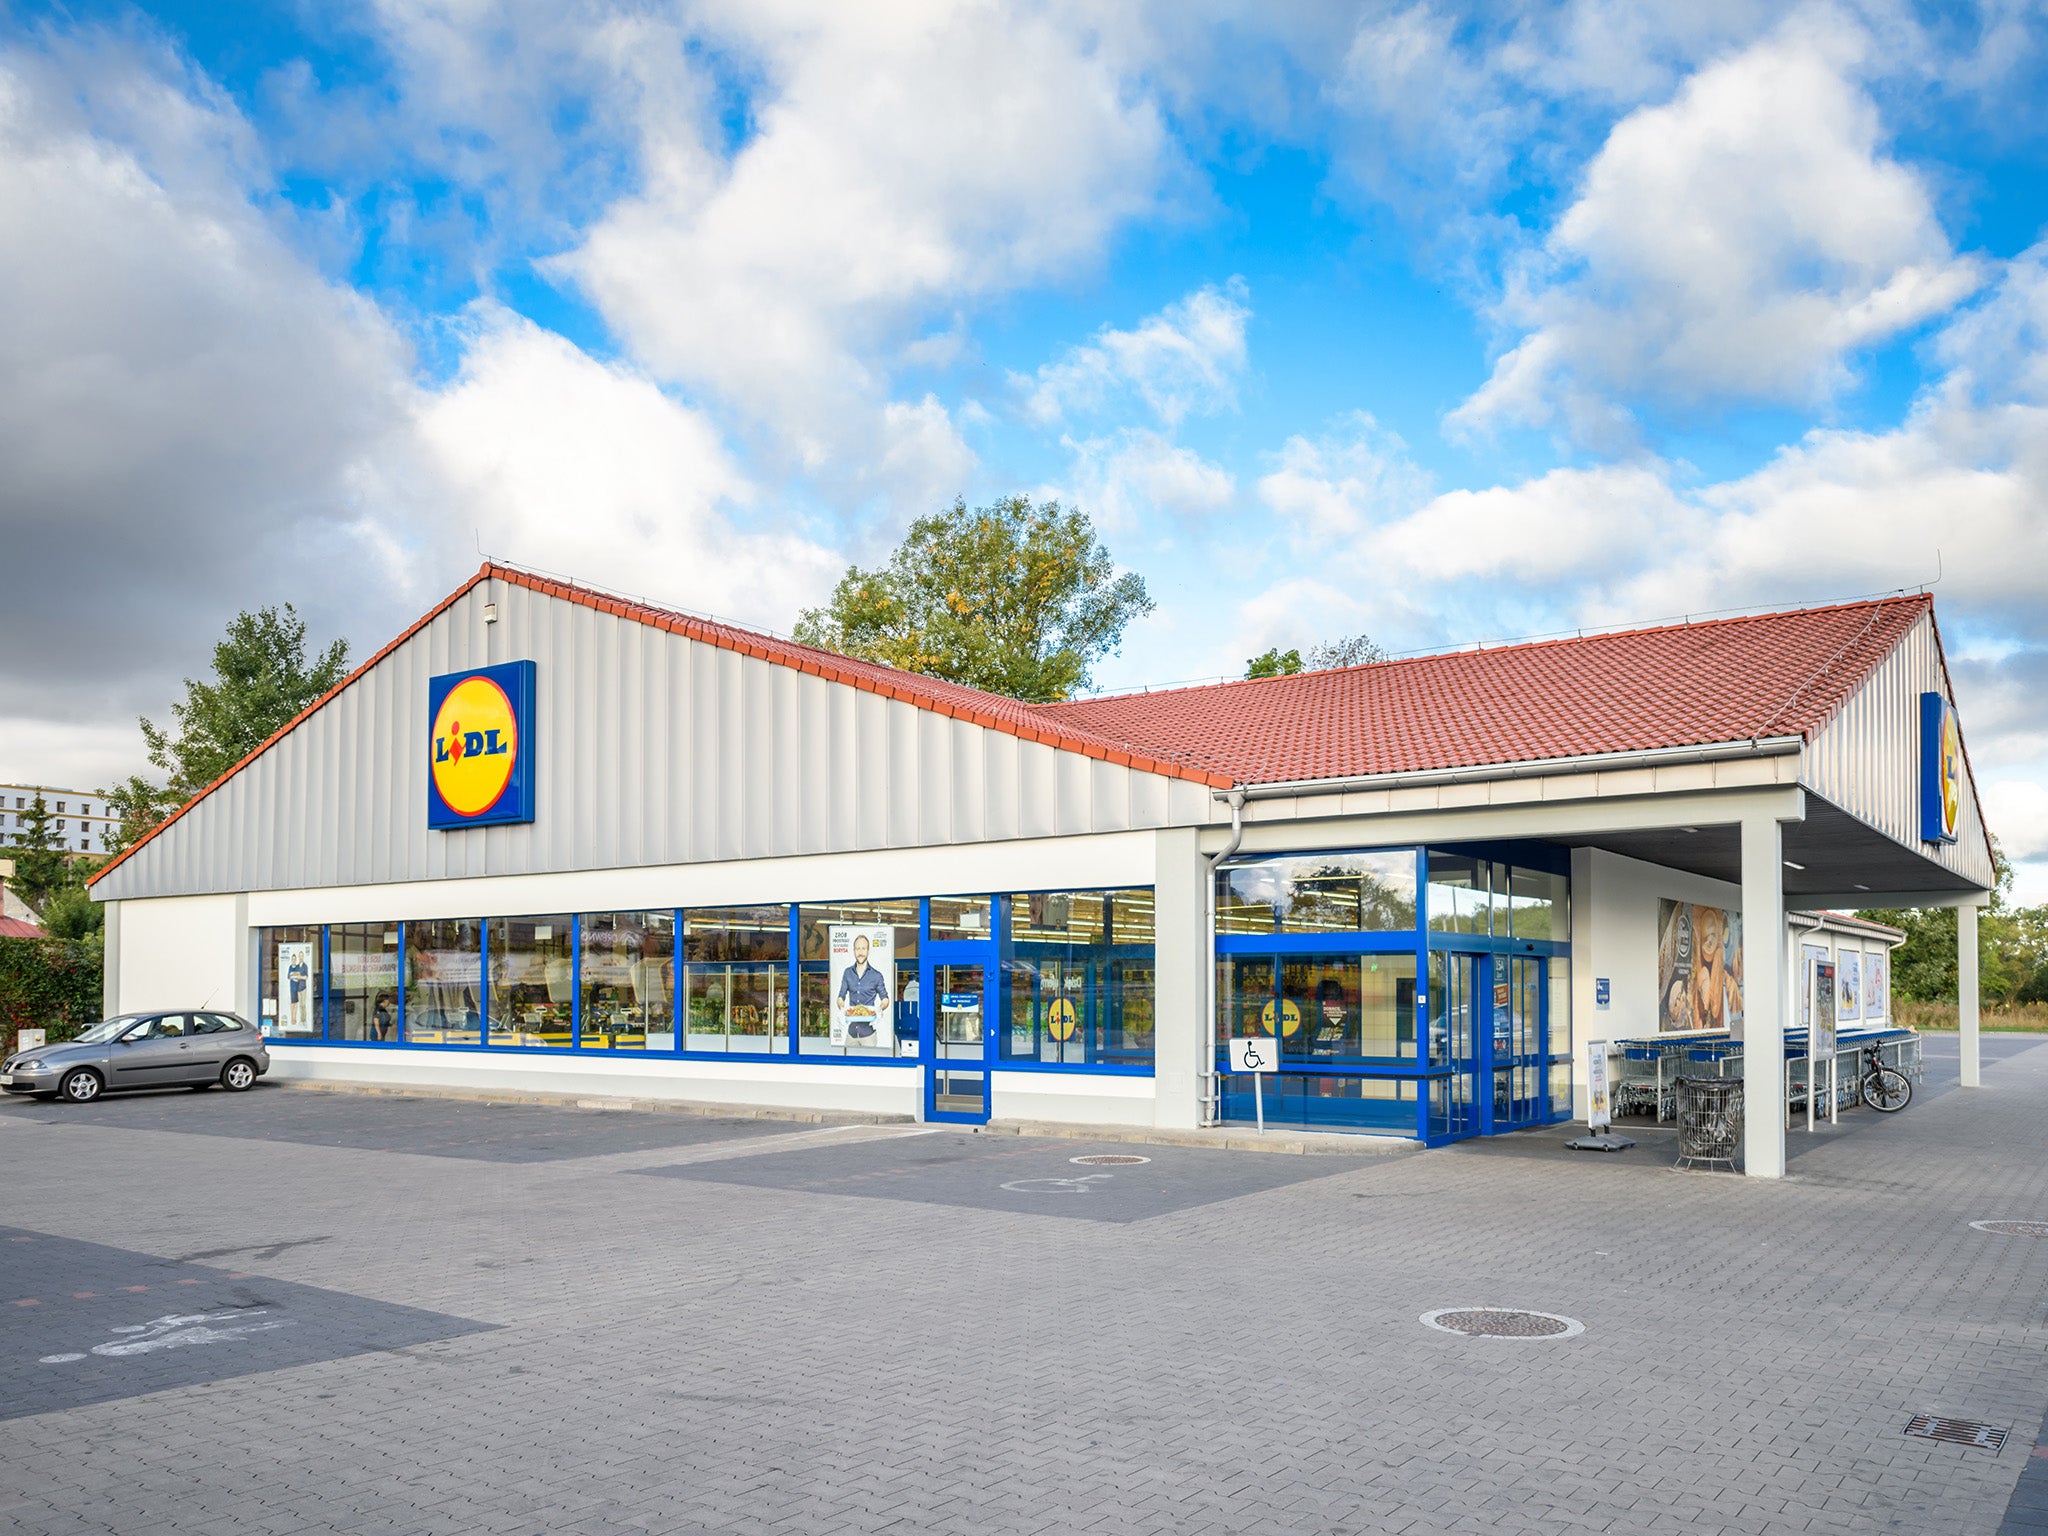 Lidl is now the UK’s seventh largest grocer